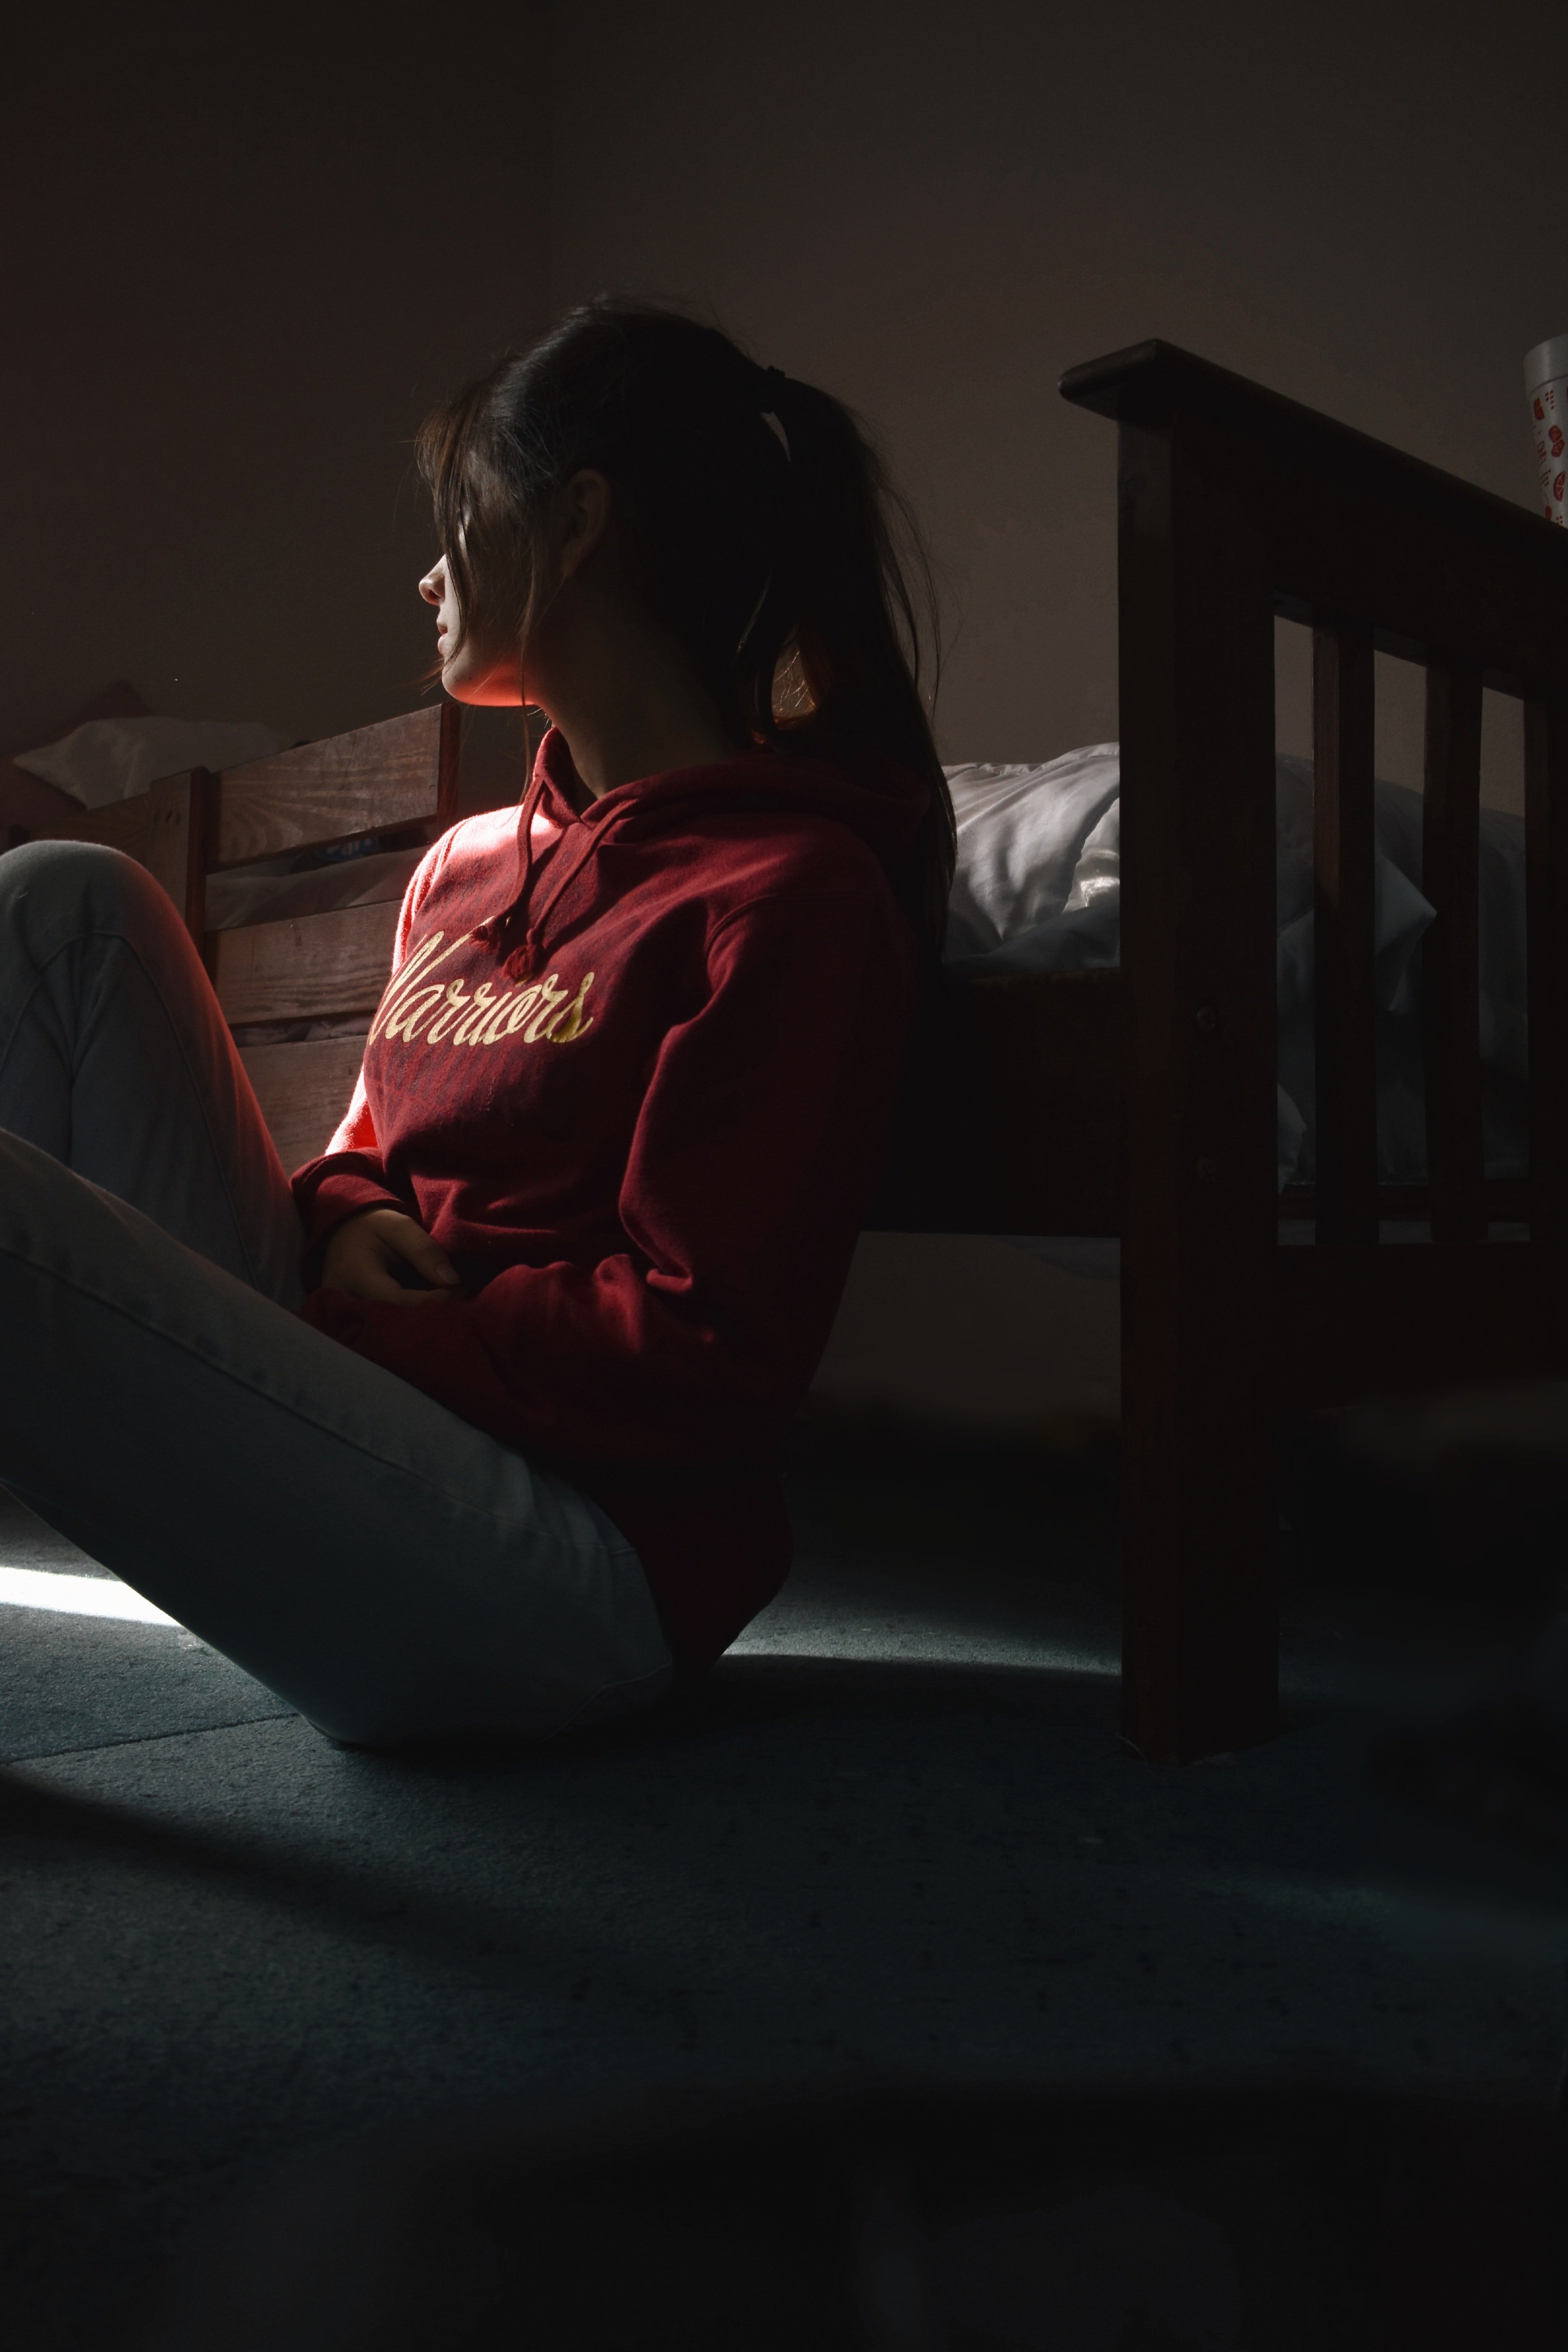 Sad woman sitting on the floor by a bed | Source: Pexels